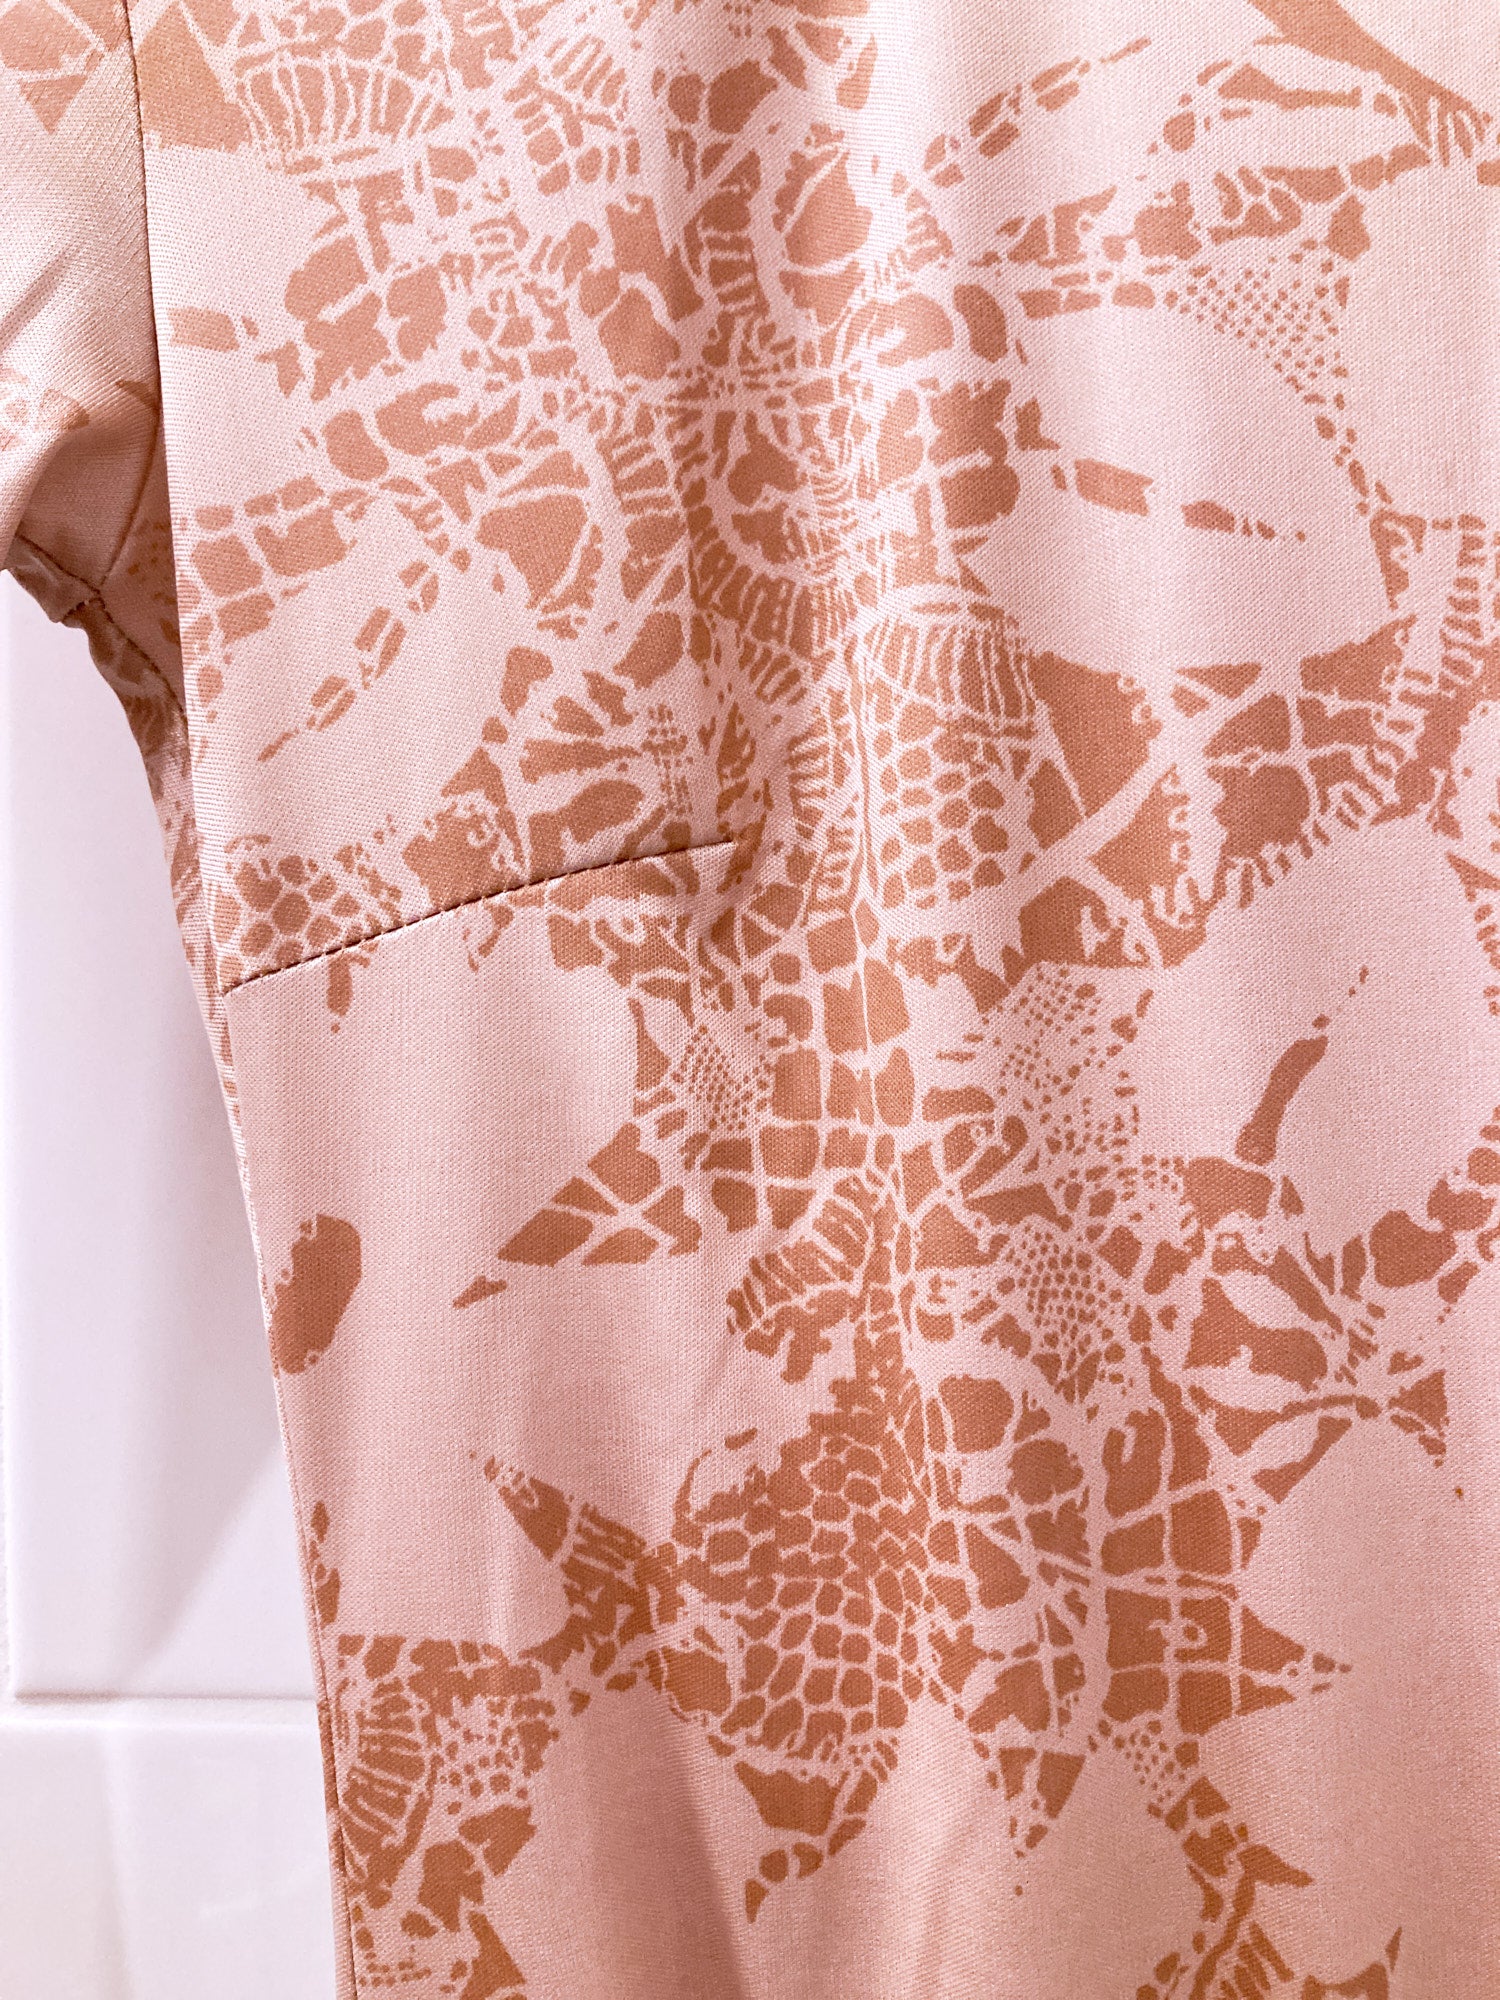 Jean Colonna pink floral print long sleeve dress with drawstring waist detail